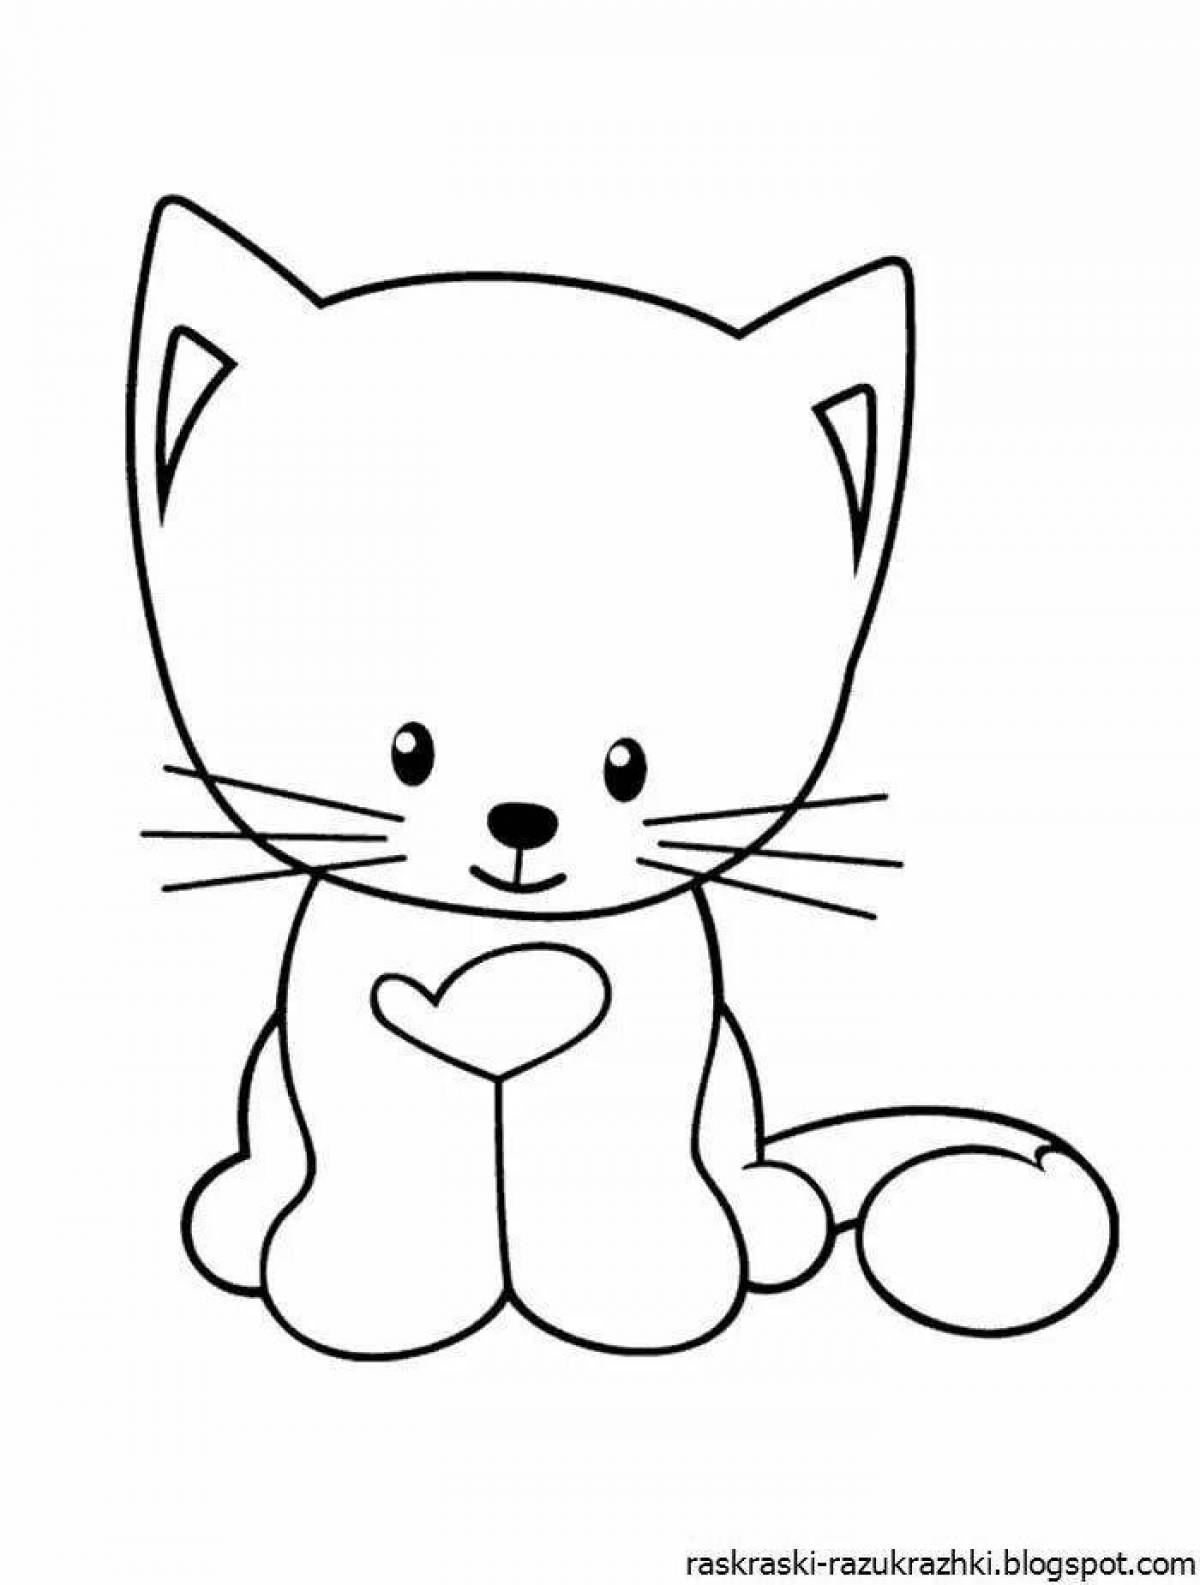 Fun coloring cat for the little ones